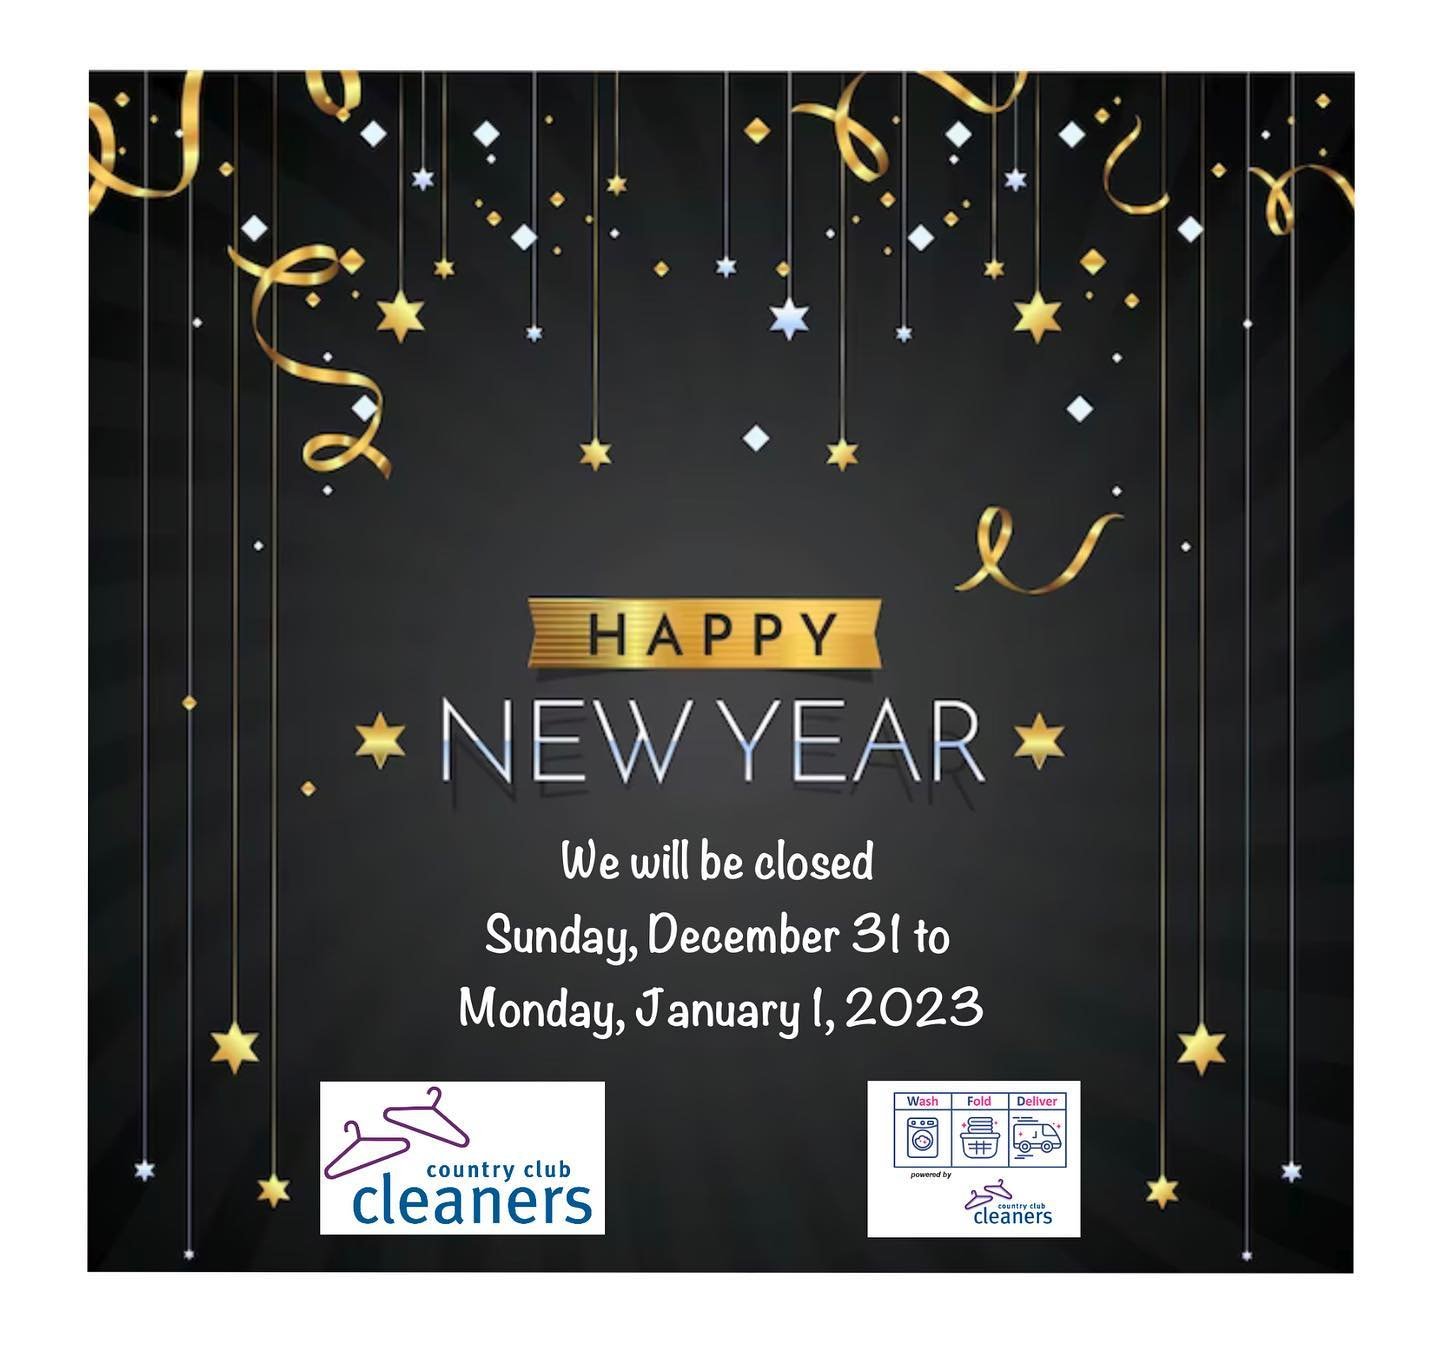 Wash, Fold, Deliver powered by Country Club Cleaners will be closed Sunday, December 31st and Monday, January 1st for New Years.

Wishing everyone a. Happy New Year!